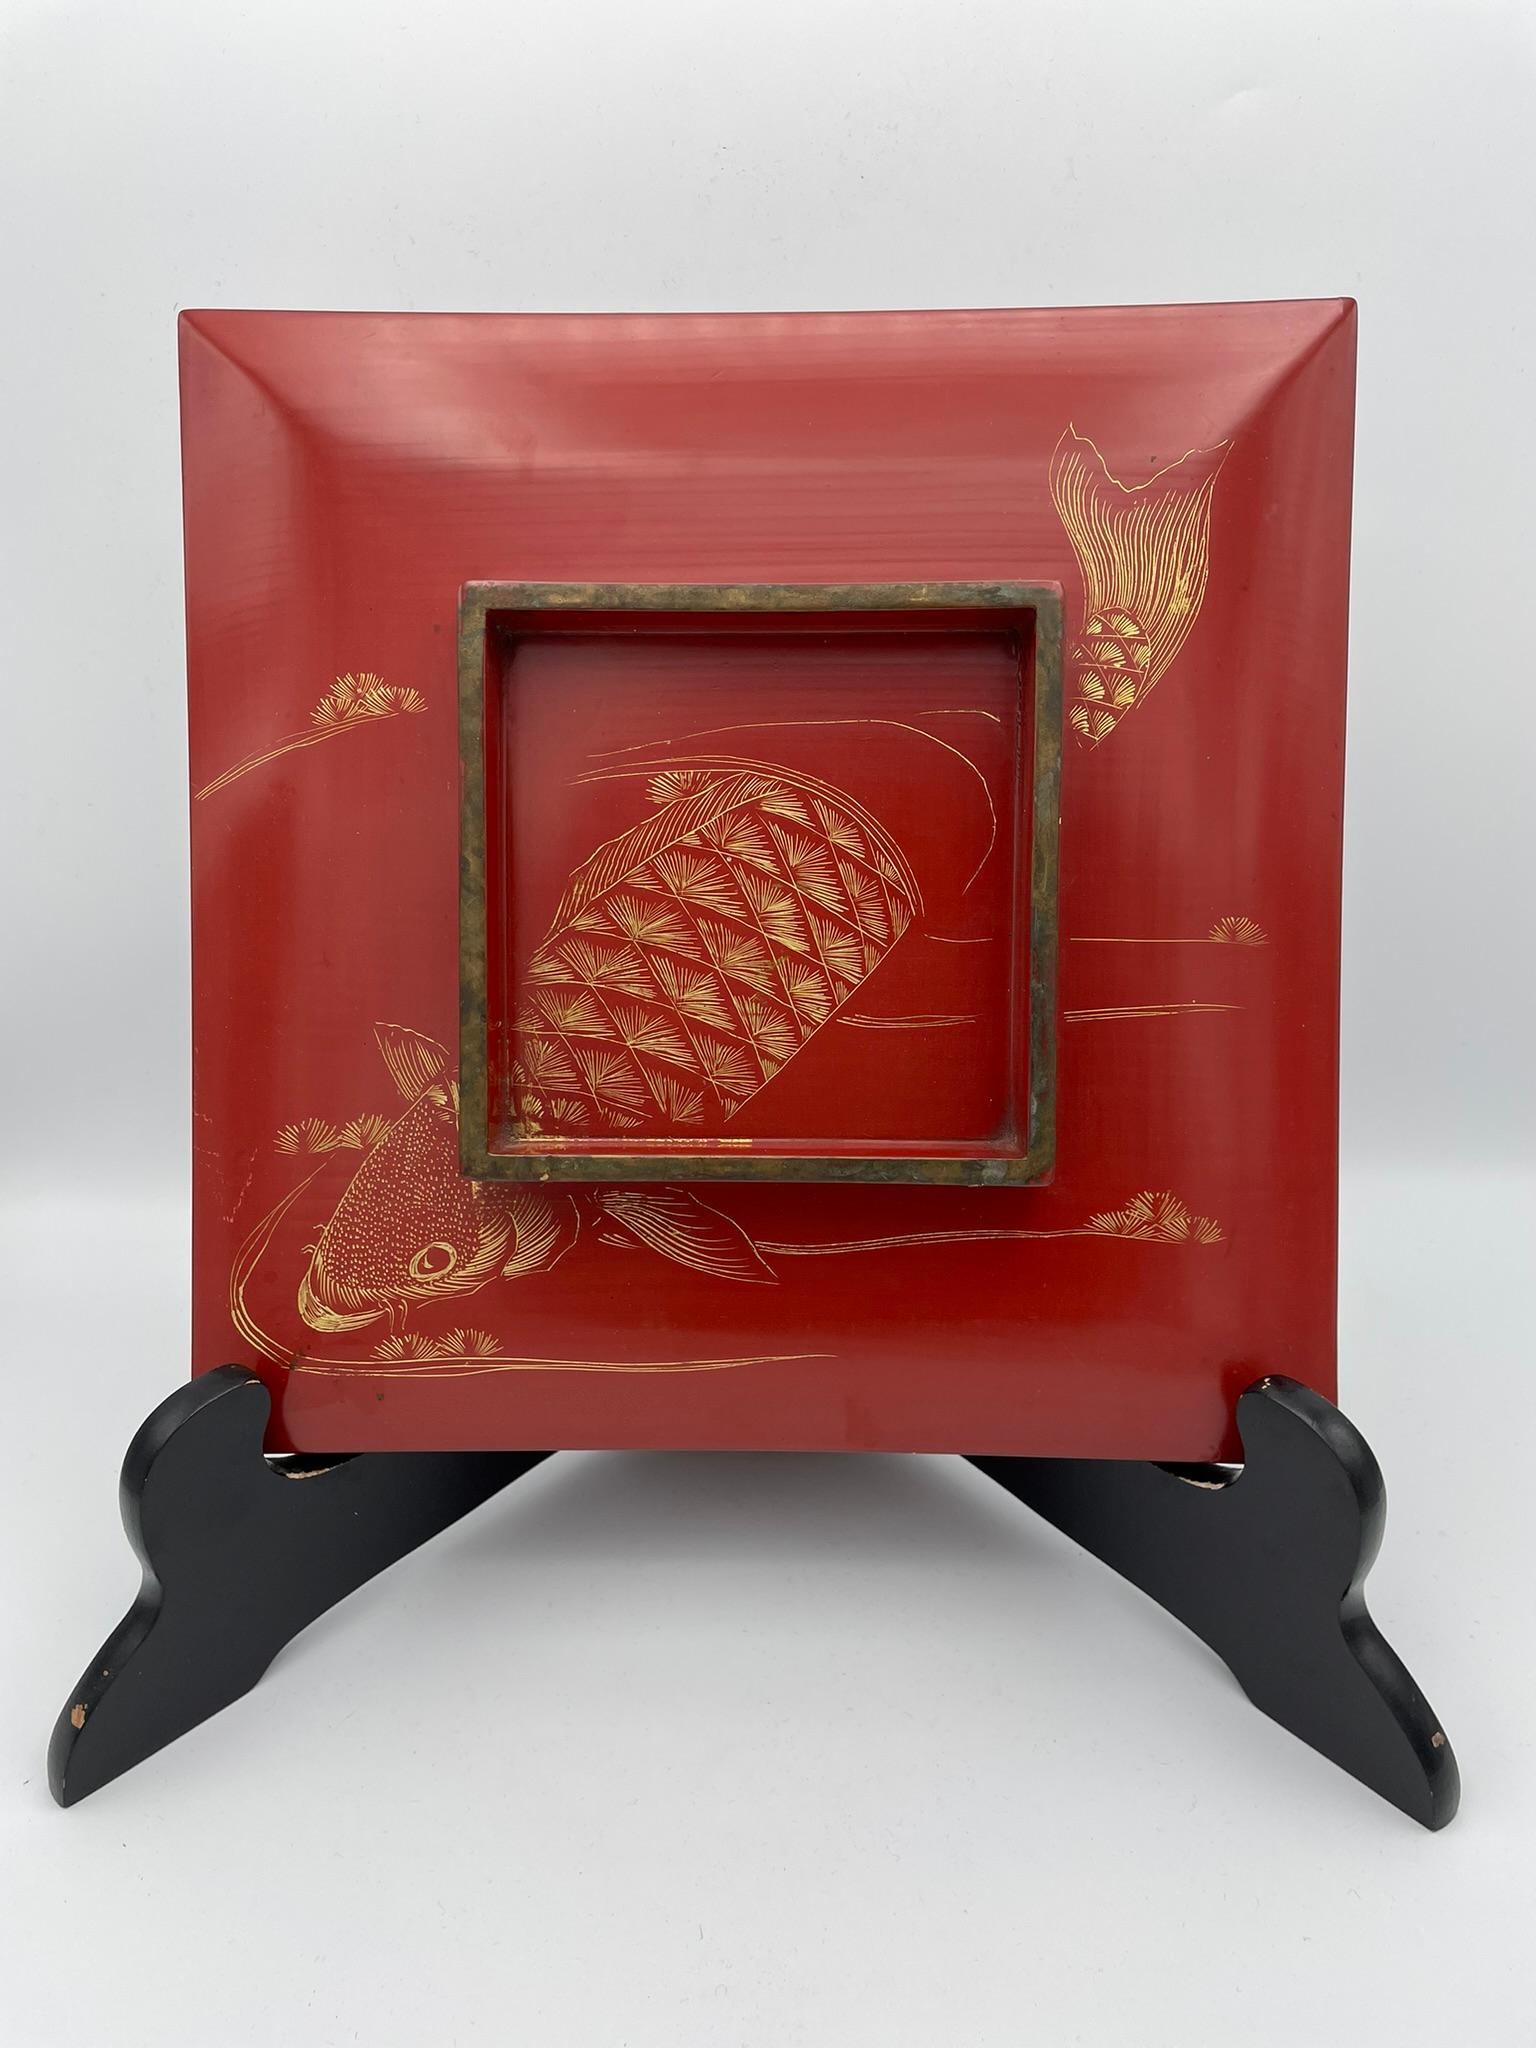 Antique Japanese Lacquer Box with a Koi Fish 1950-1970s 3